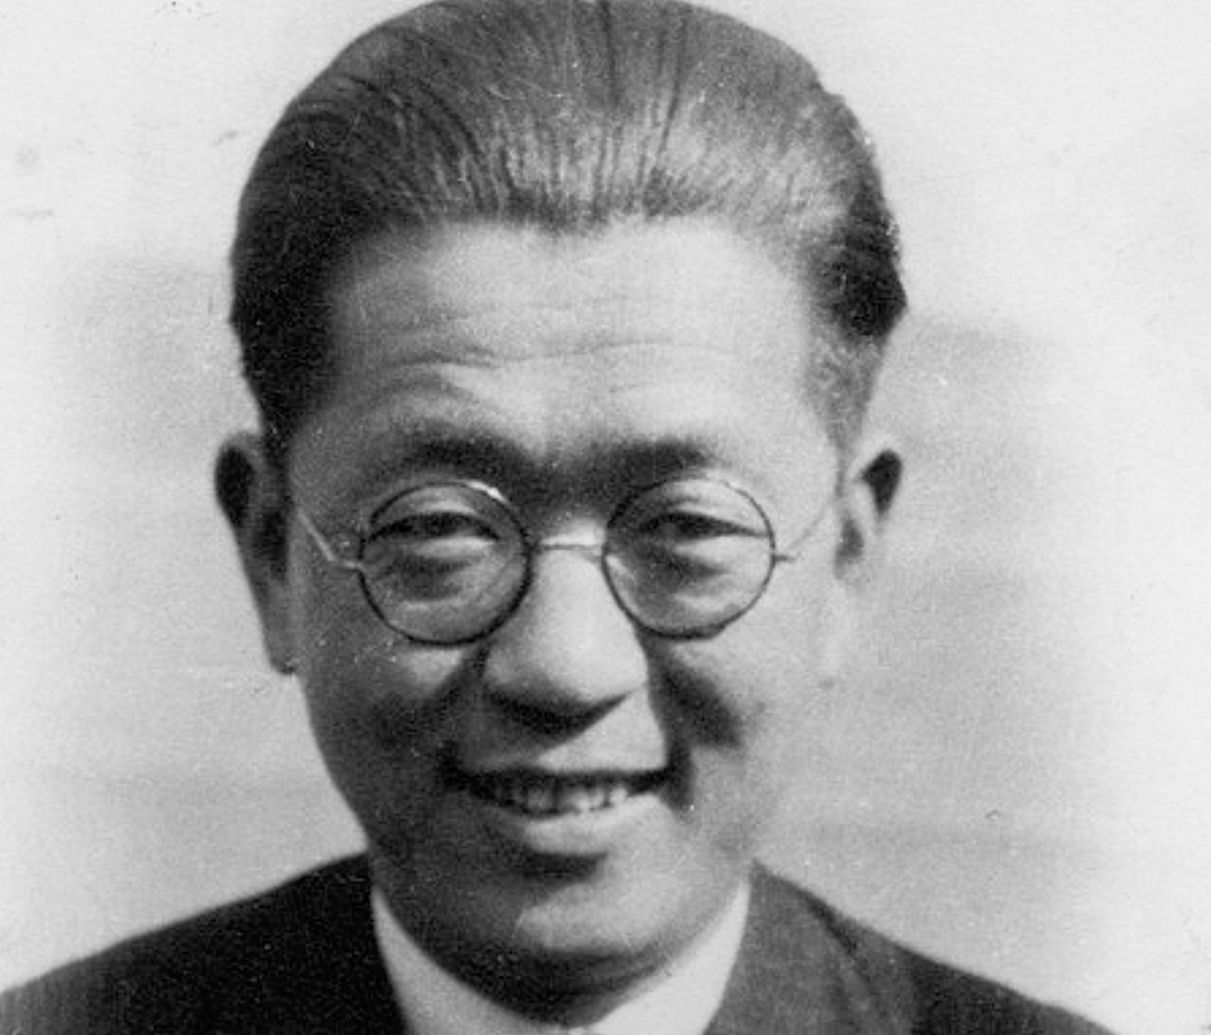 Close up photo of Chiang Yee. He wears glasses and smiles at the camera.